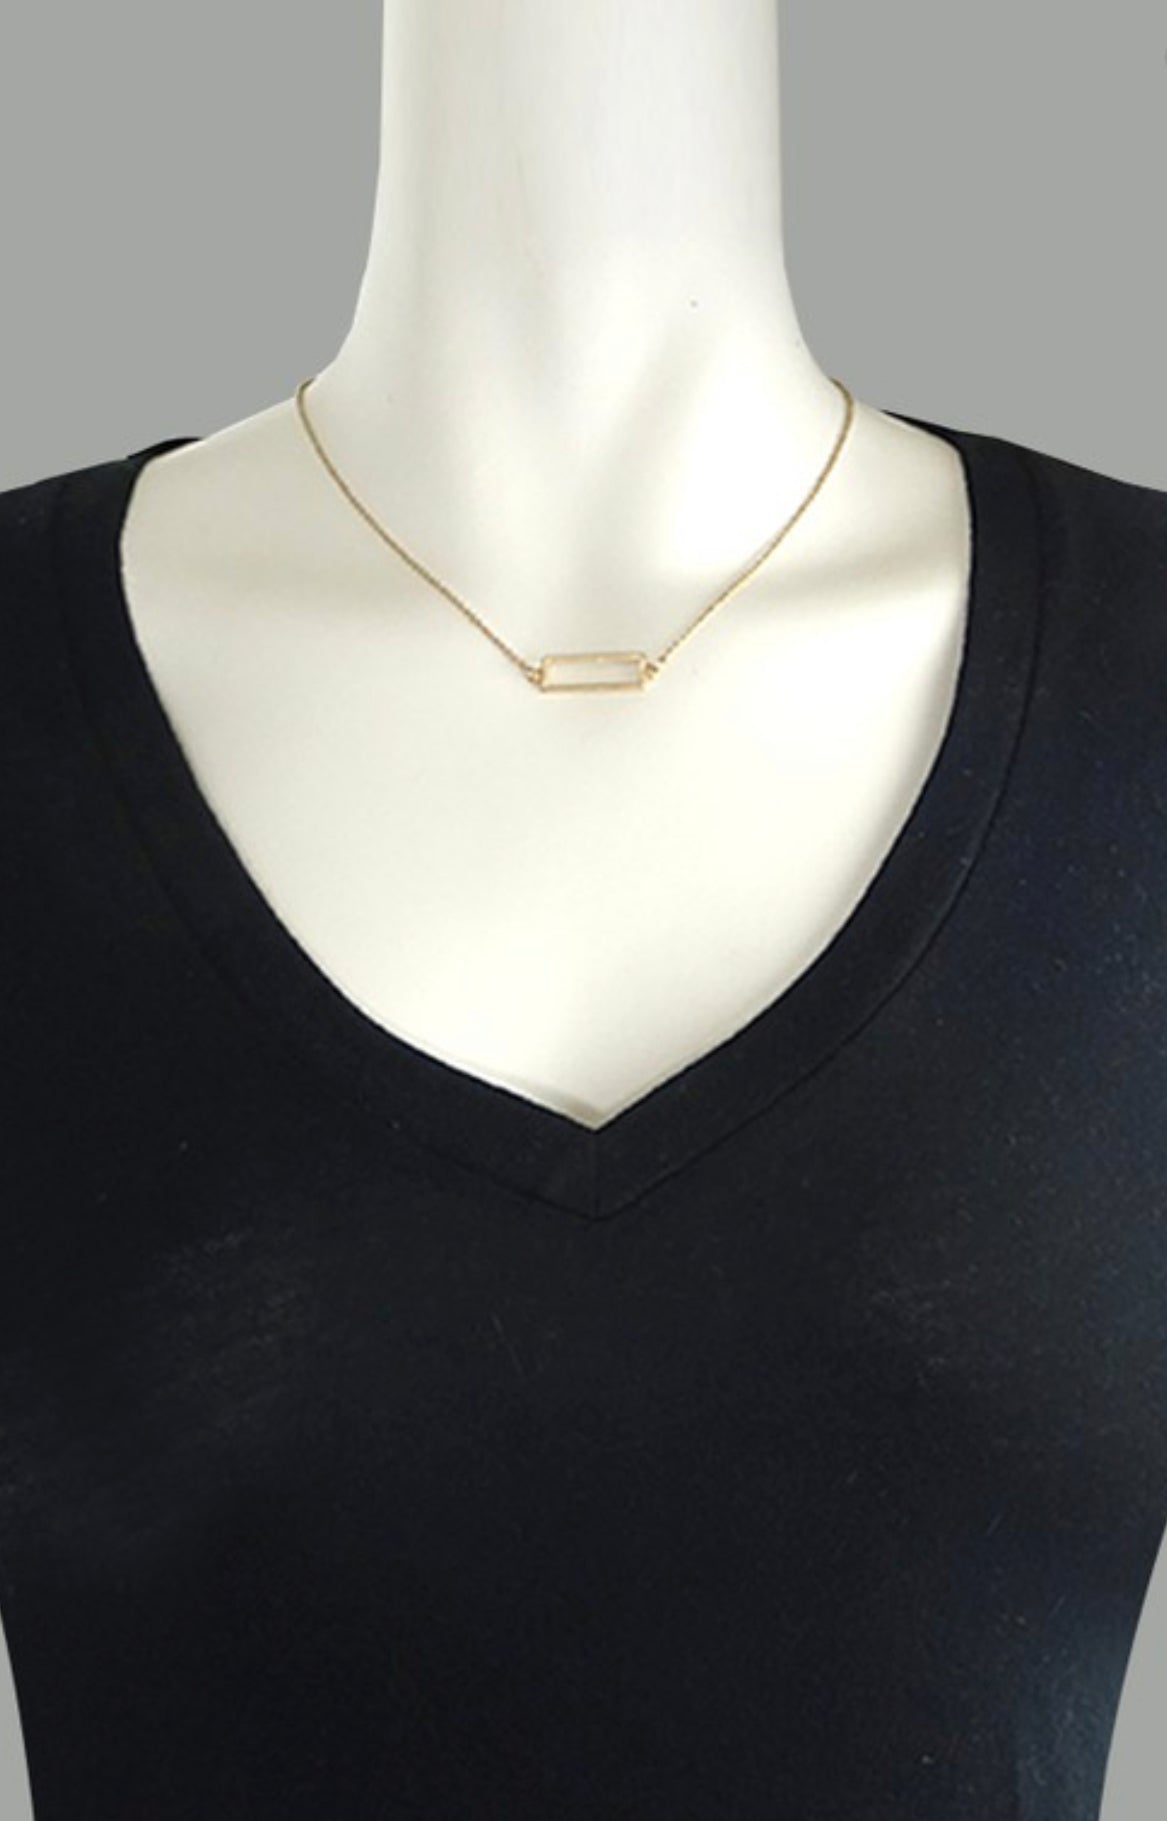 Keep It Simple Necklace